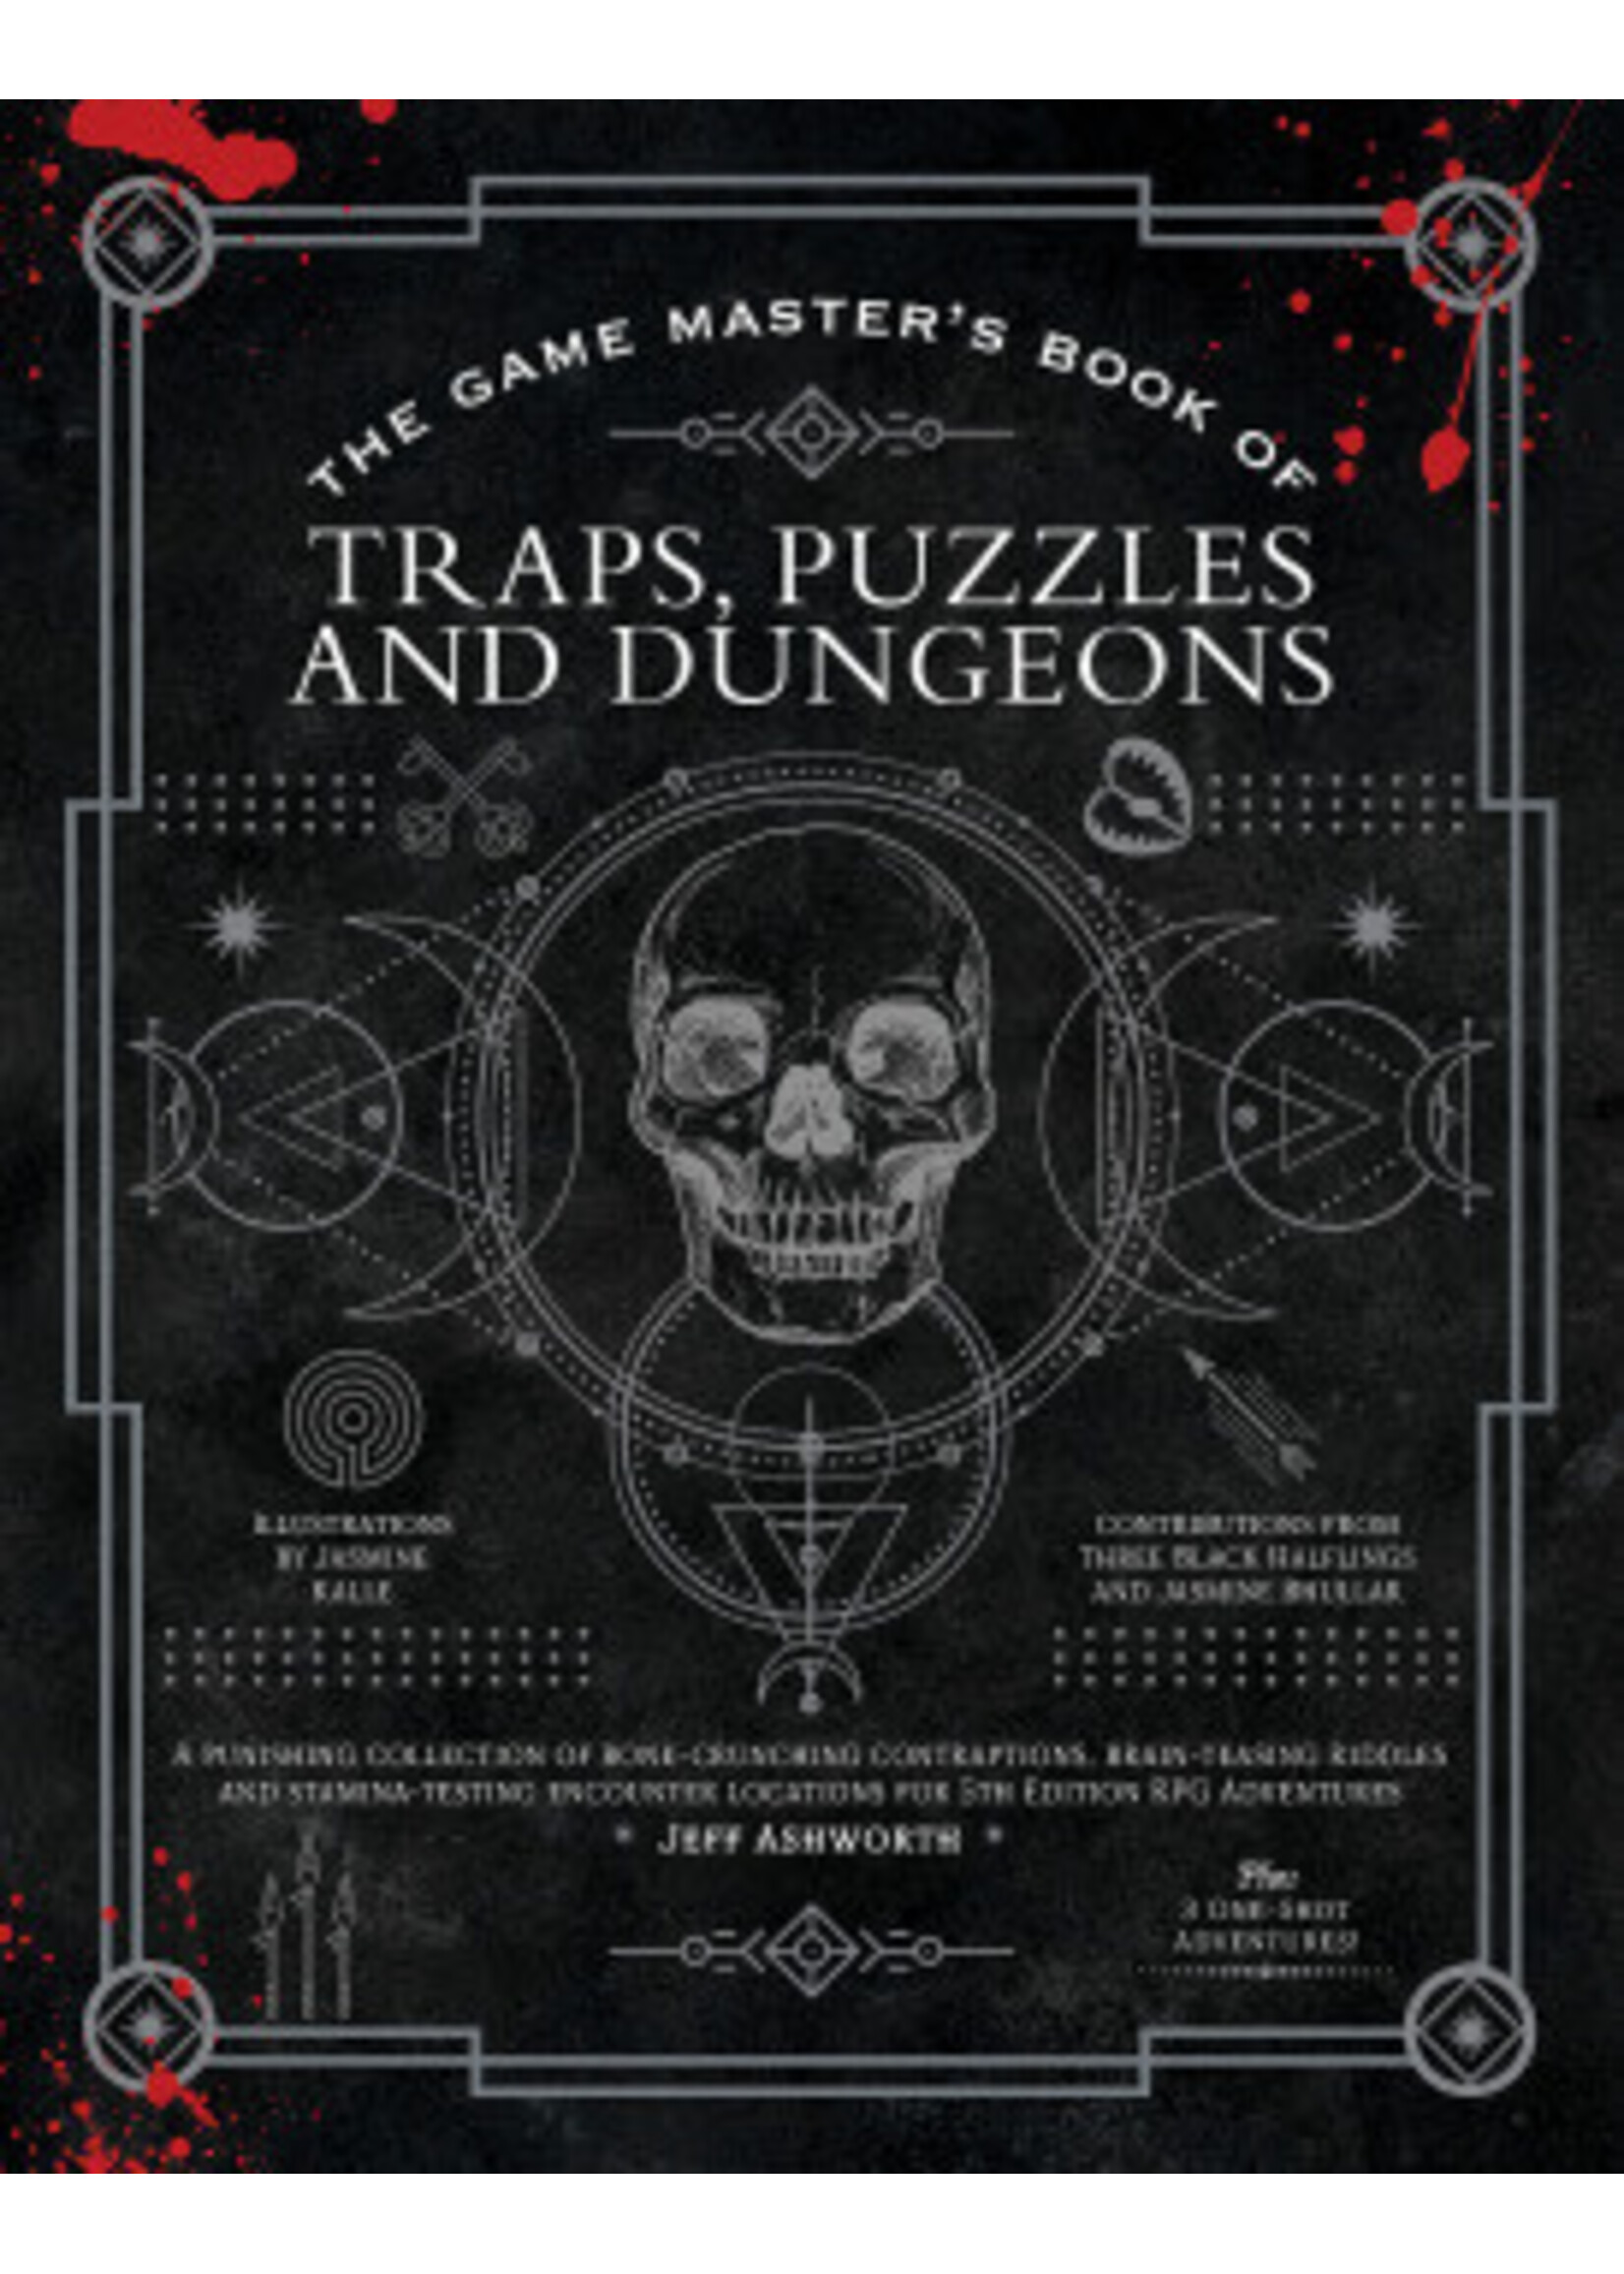 TOPIX MEDIA LAB THE GAME MASTER'S BOOK OF TRAPS, PUZZLES, DUNGEONS